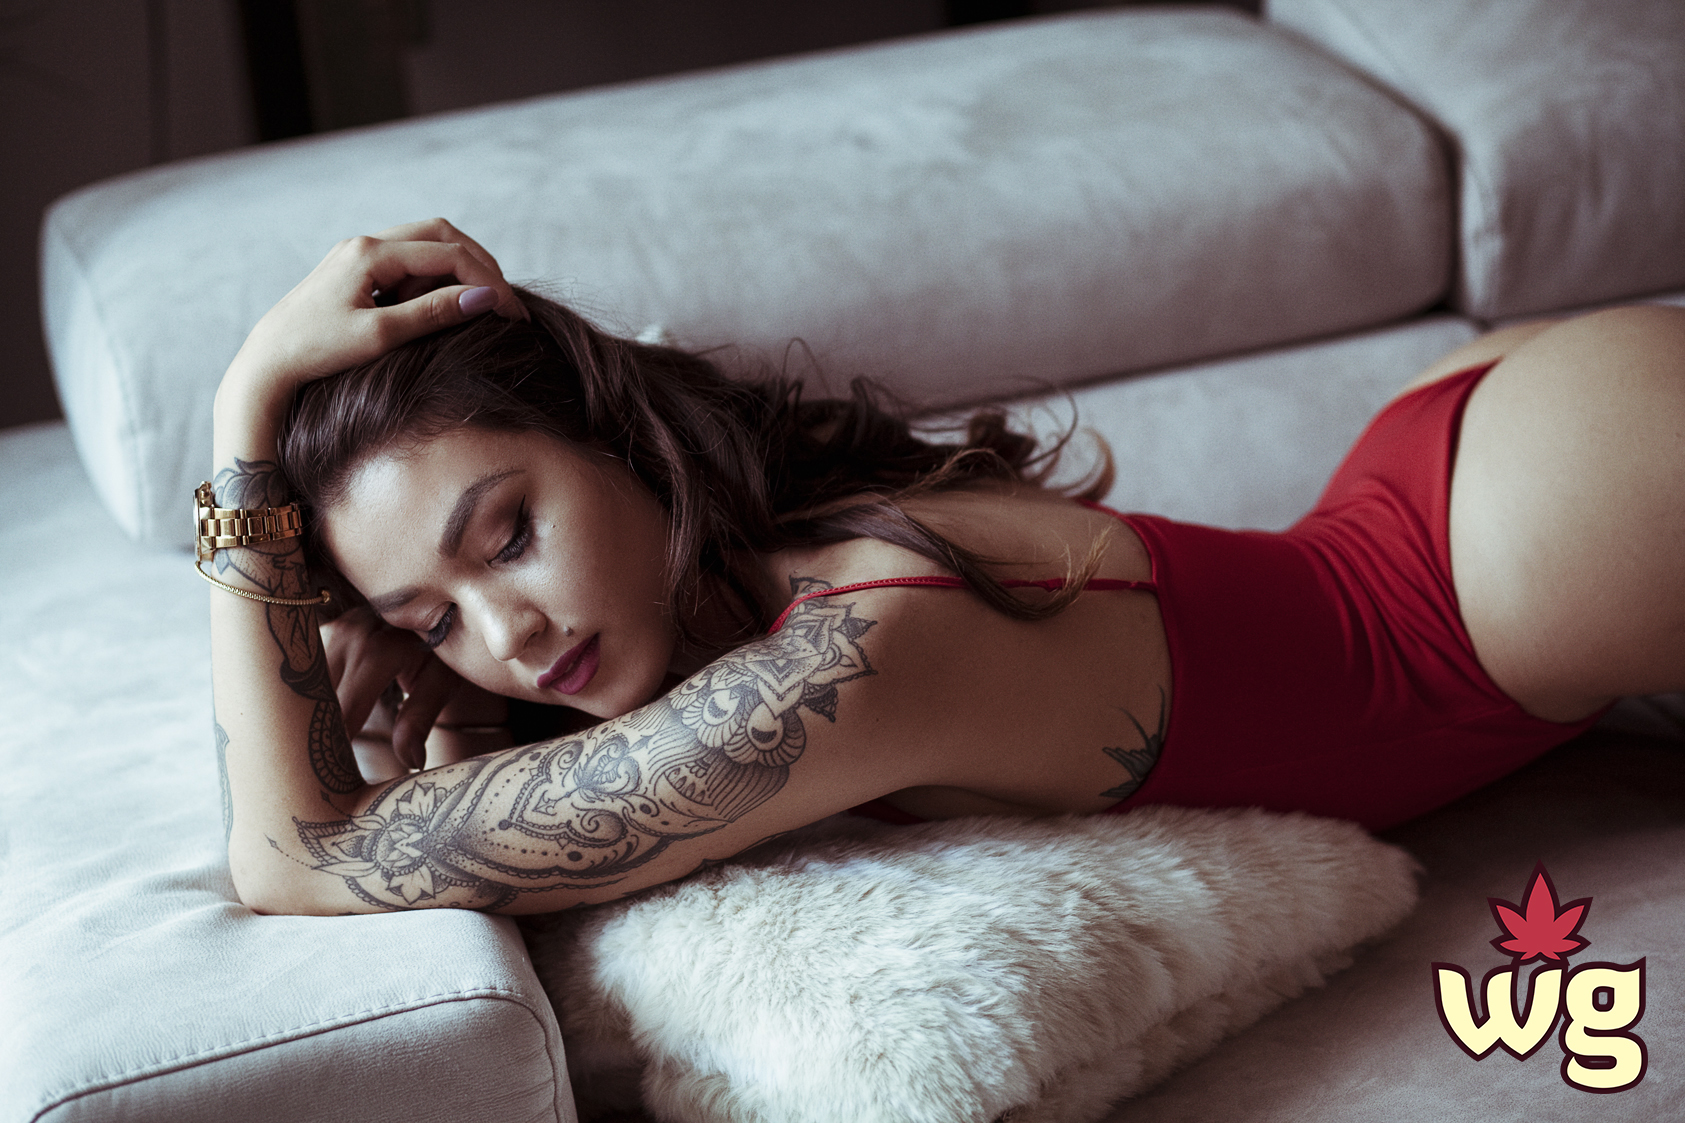 Hot tattooed woman posses in red bodysuit | Weed girls